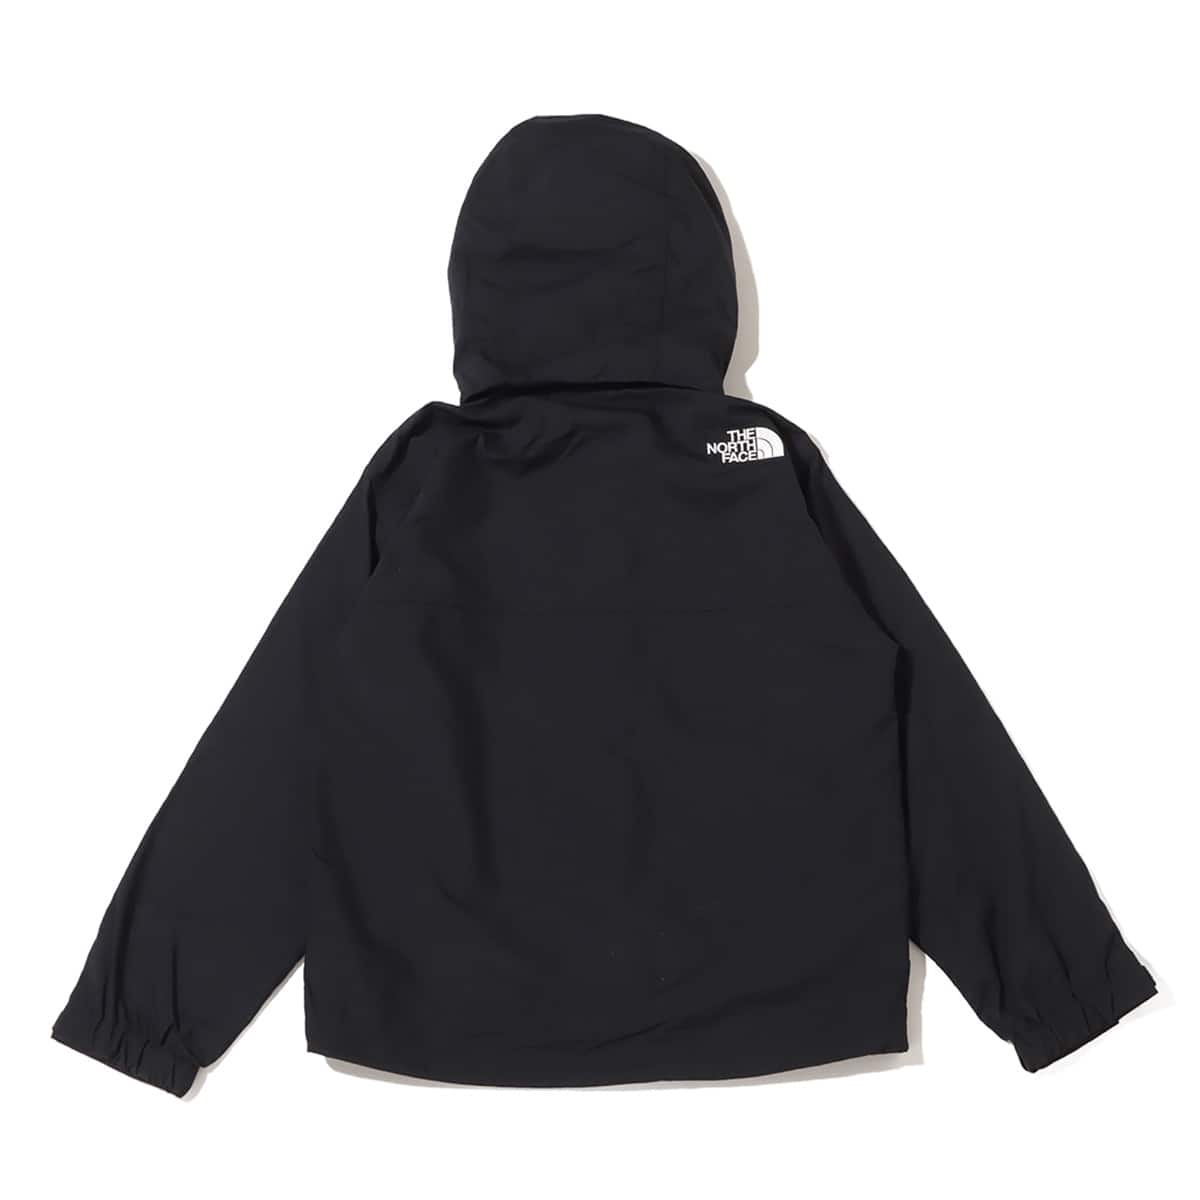 THE NORTH FACE COMPACT JACKET BLACK 23FW-I